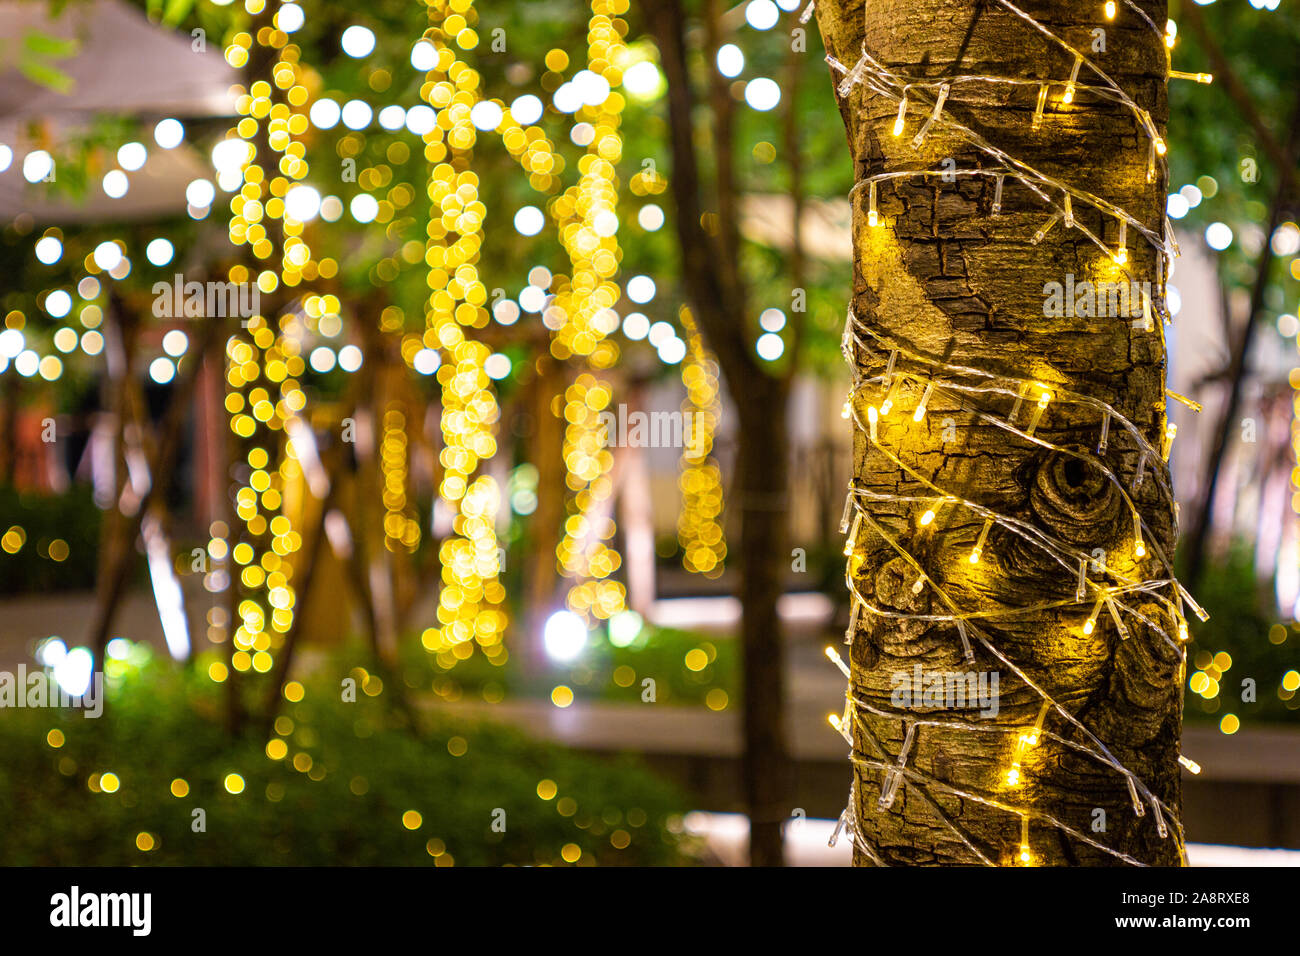 https://c8.alamy.com/comp/2A8RXE8/blur-bokeh-decorative-outdoor-string-lights-hanging-on-tree-in-the-garden-at-night-time-decorative-christmas-lights-happy-new-year-2A8RXE8.jpg